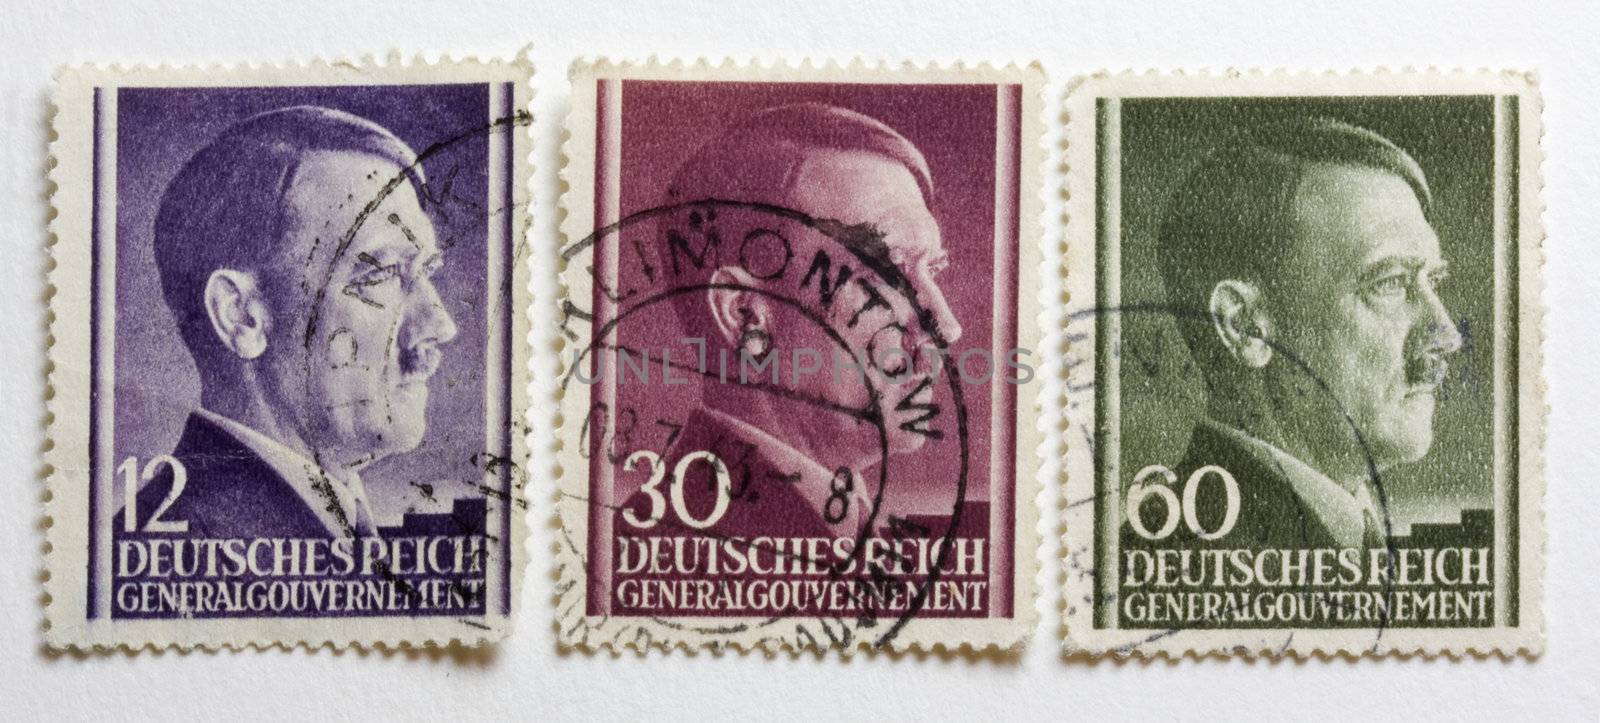 Adolf Hitler portrait on three German World War II post stamps issued and postmarked on the territory of occupied Poland (the General Government)